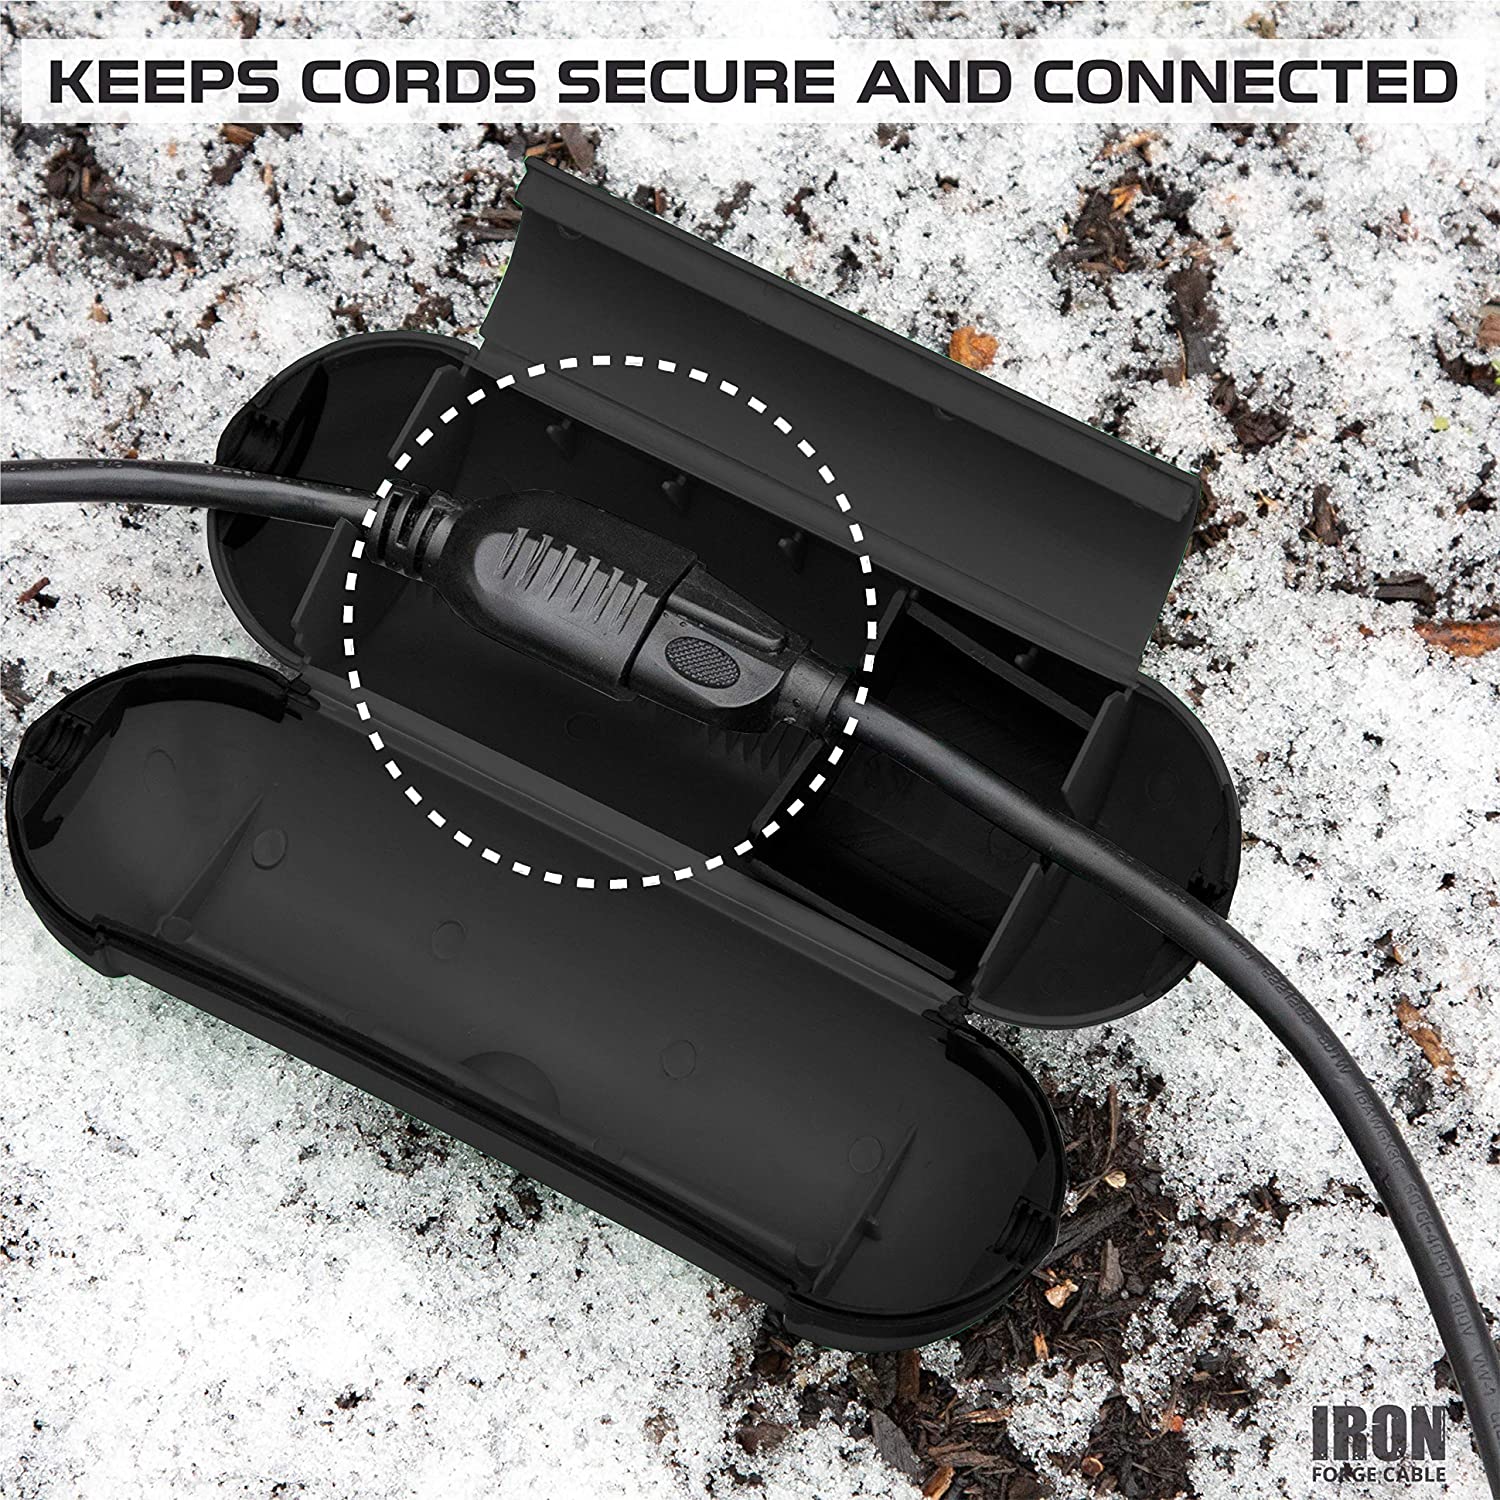 Waterproof Extension Cord Covers